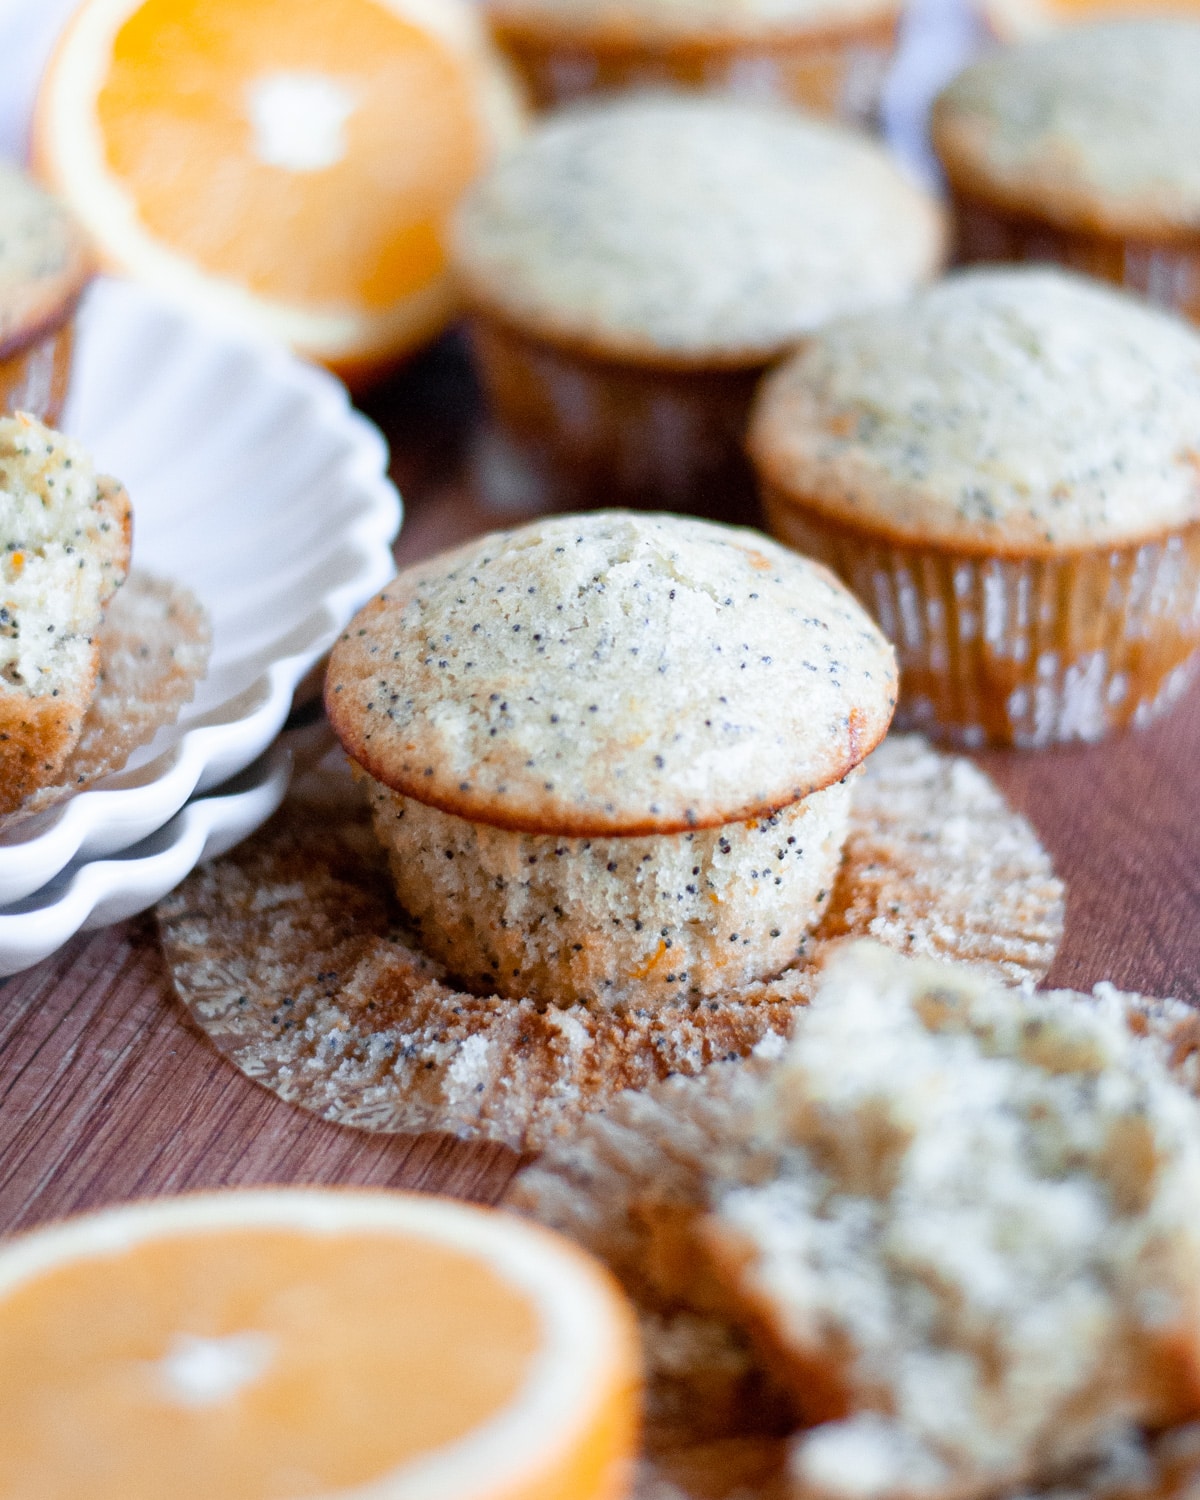 an unwrapped orange and poppy seed muffin sits on it's wrapper surrounded by more muffins, a stack of white plates, and cut oranges.